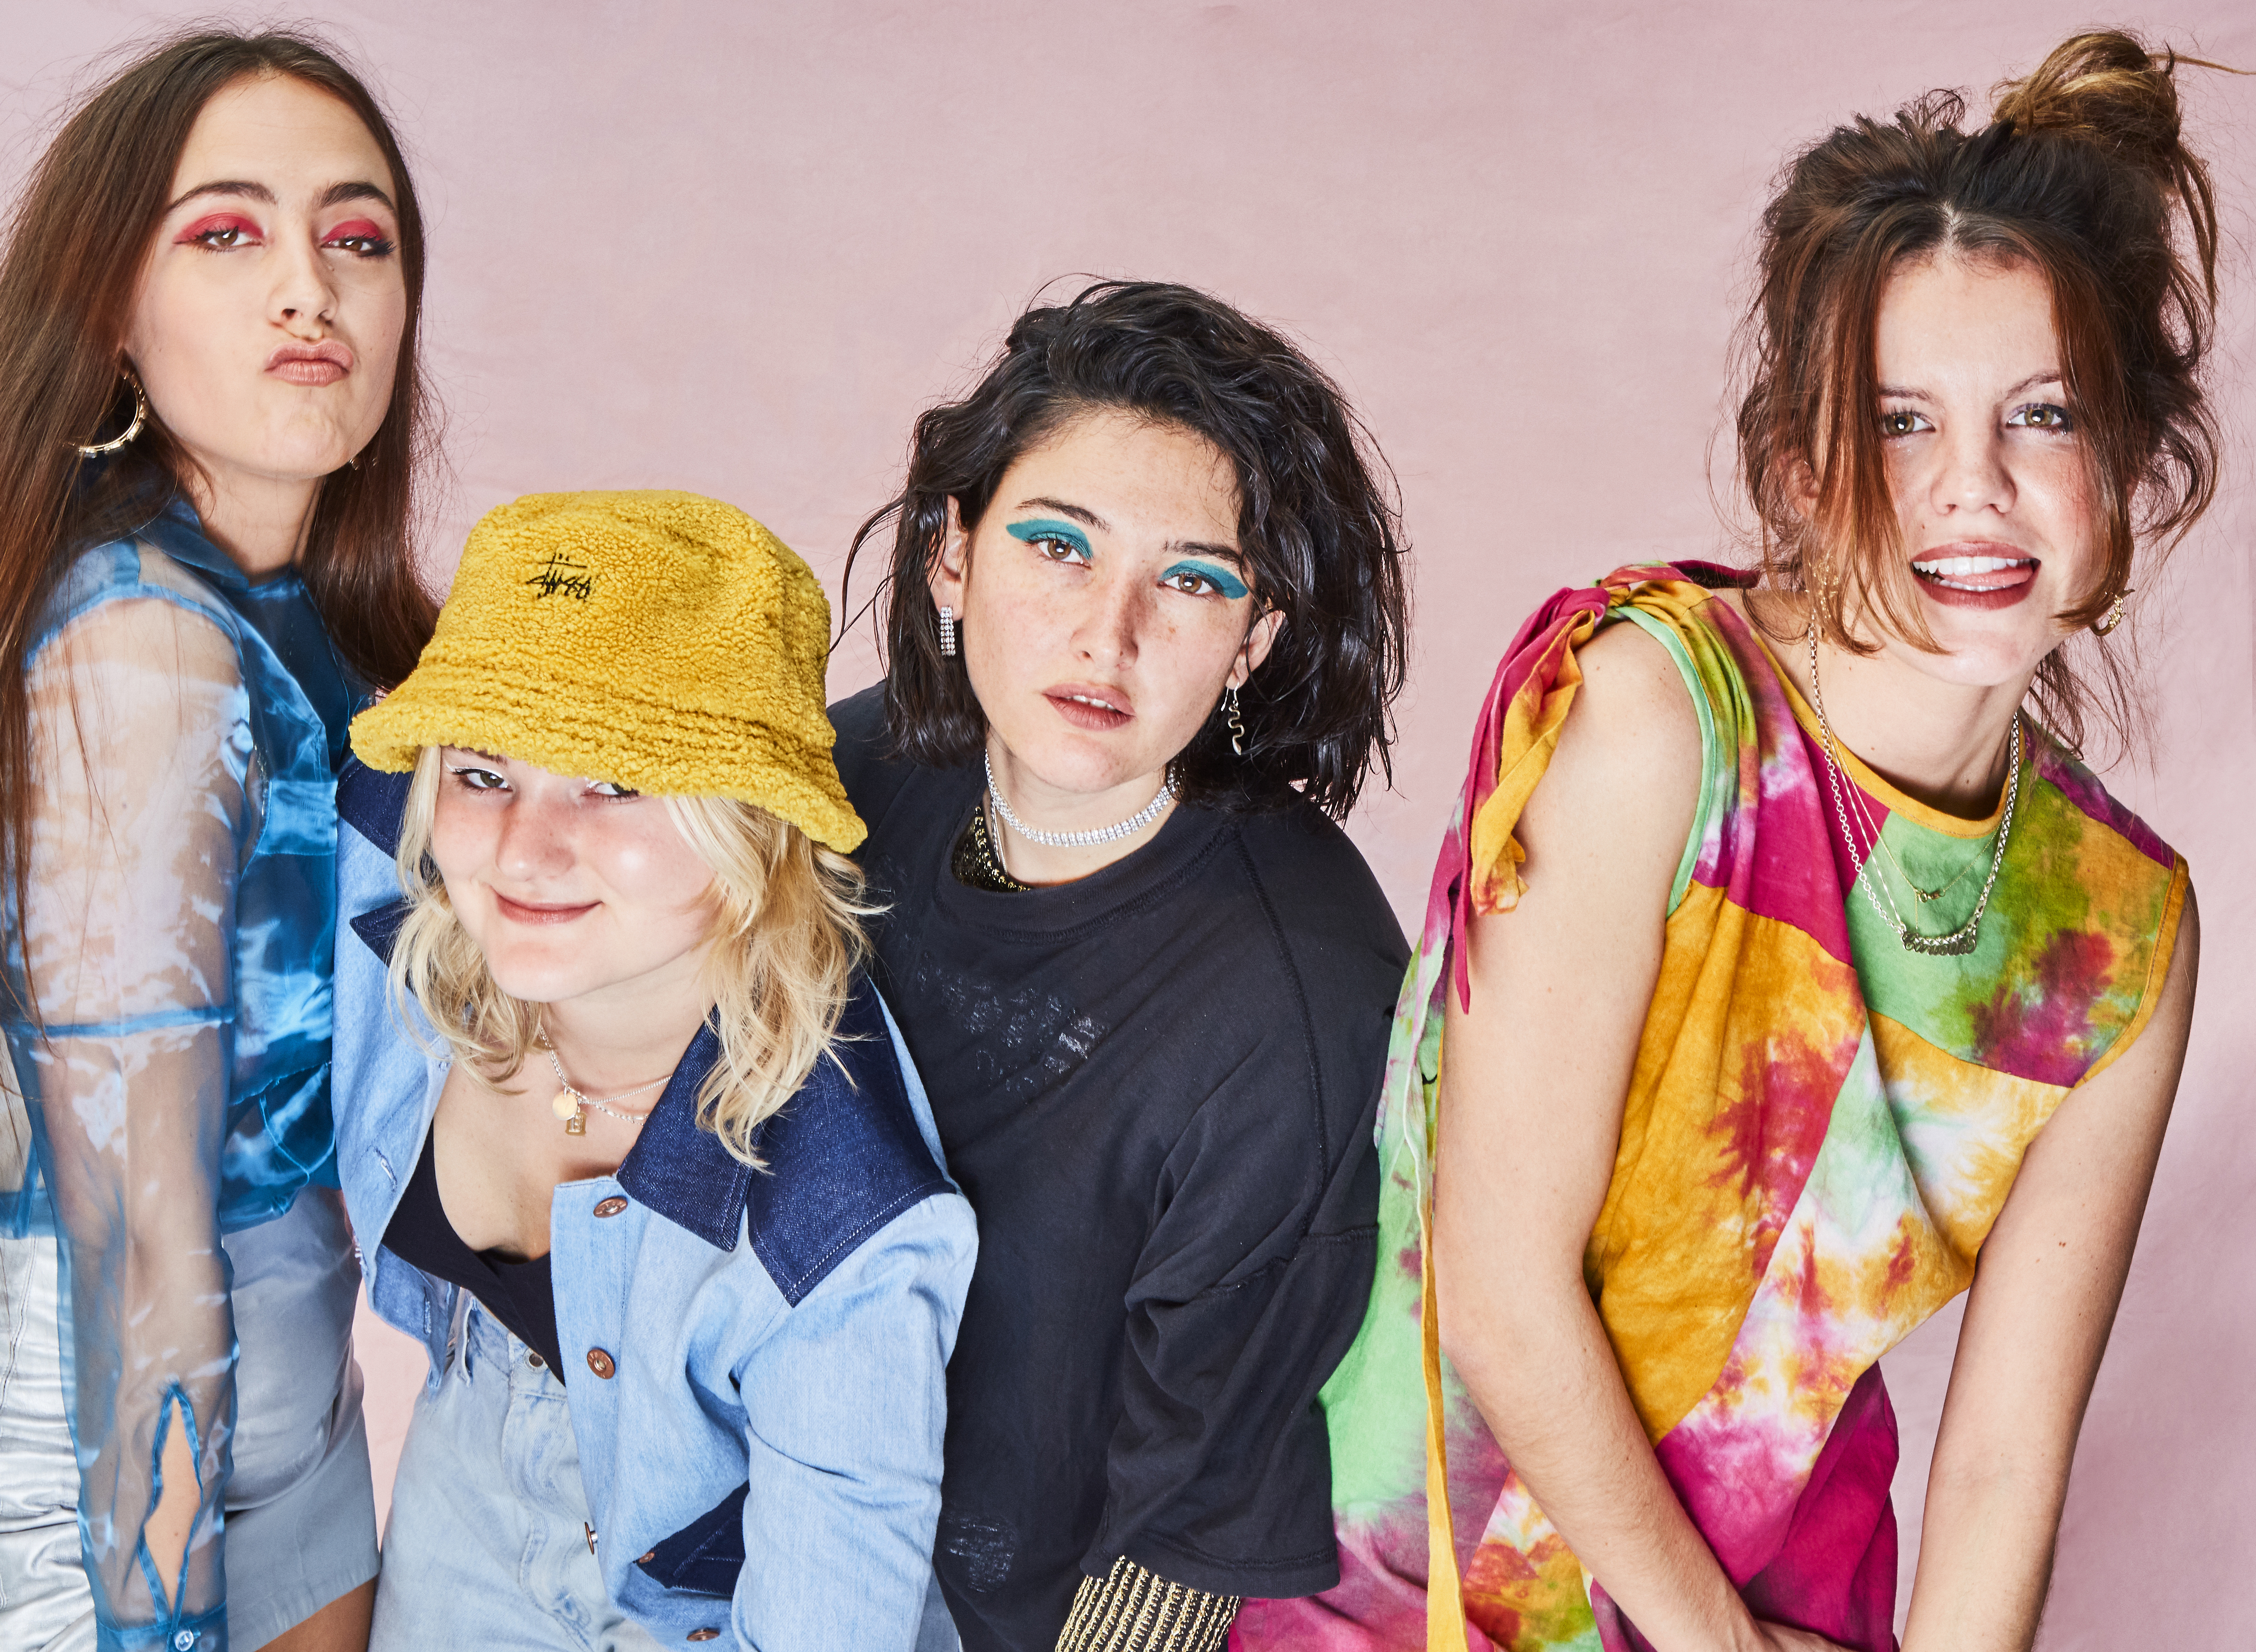 Hinds Get Their Faces Dirty in 'Easy' Video